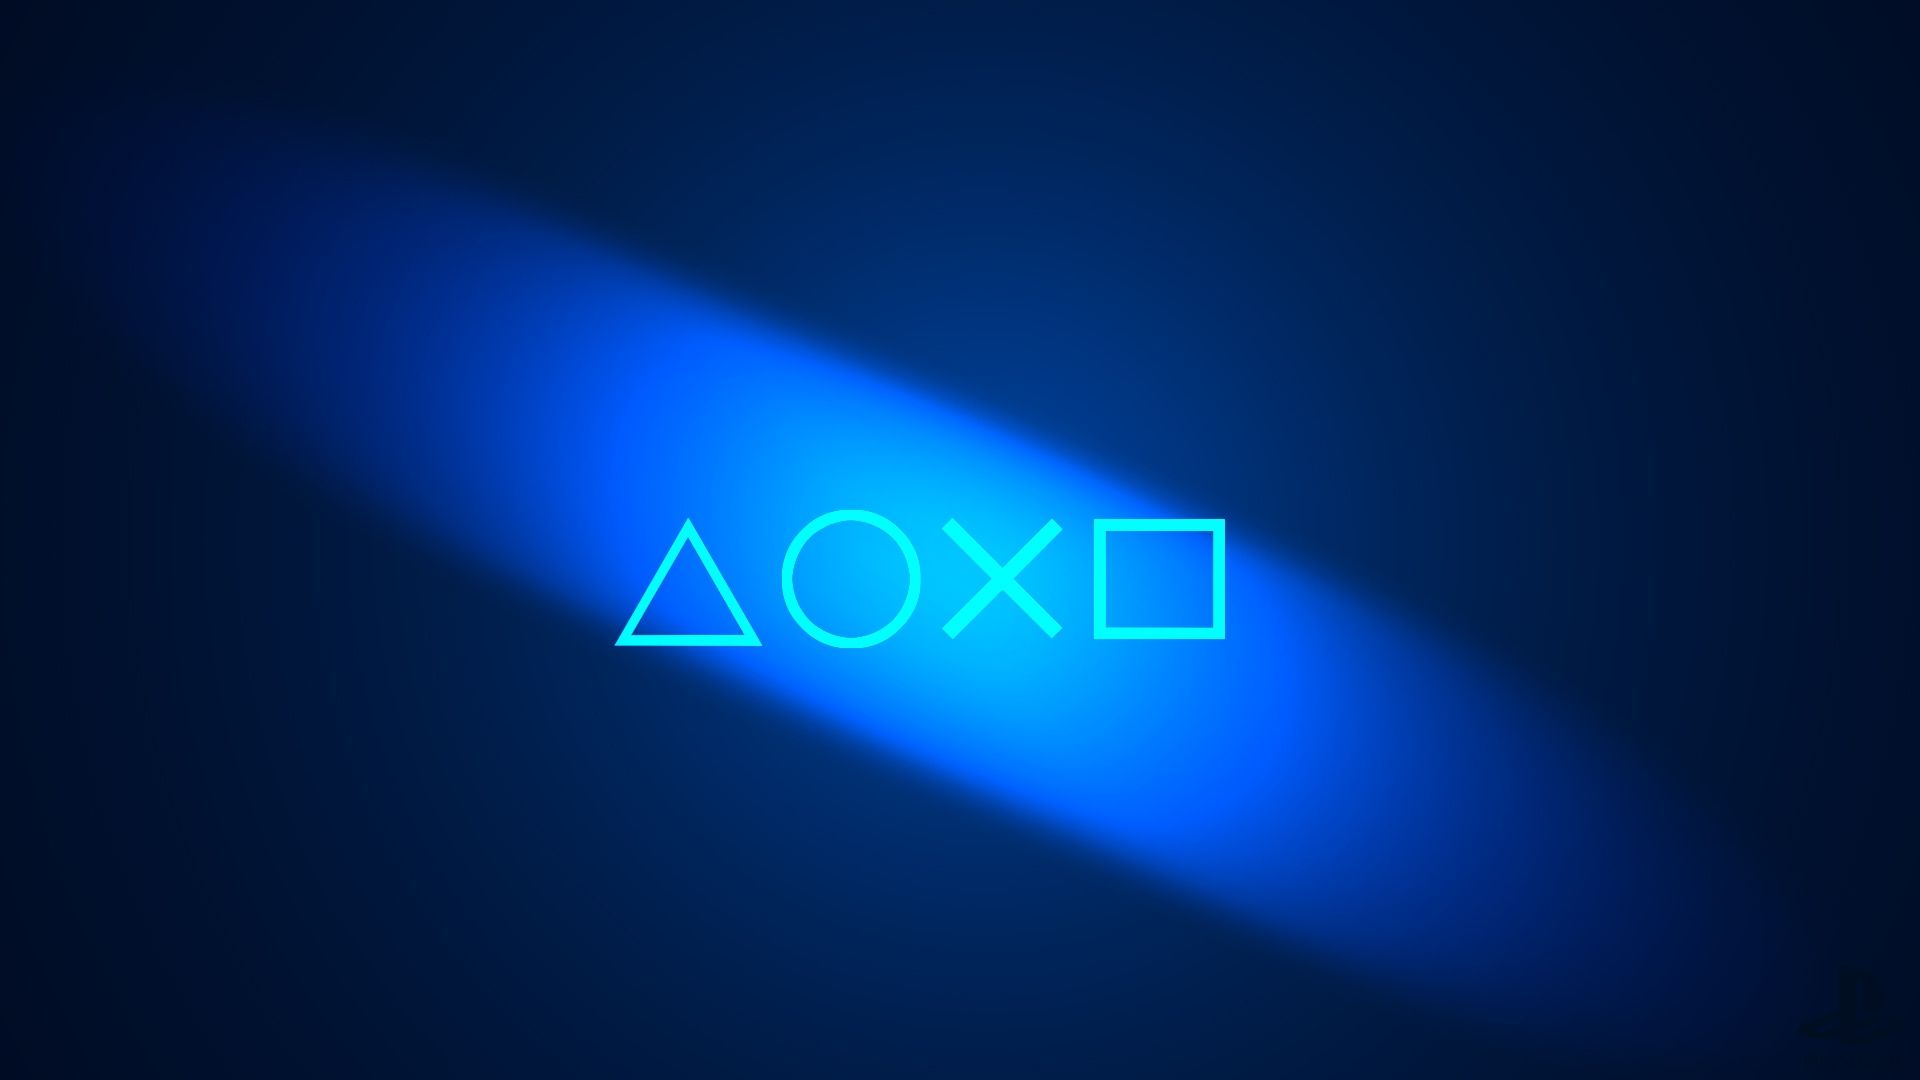 Ps4 Live Wallpapers